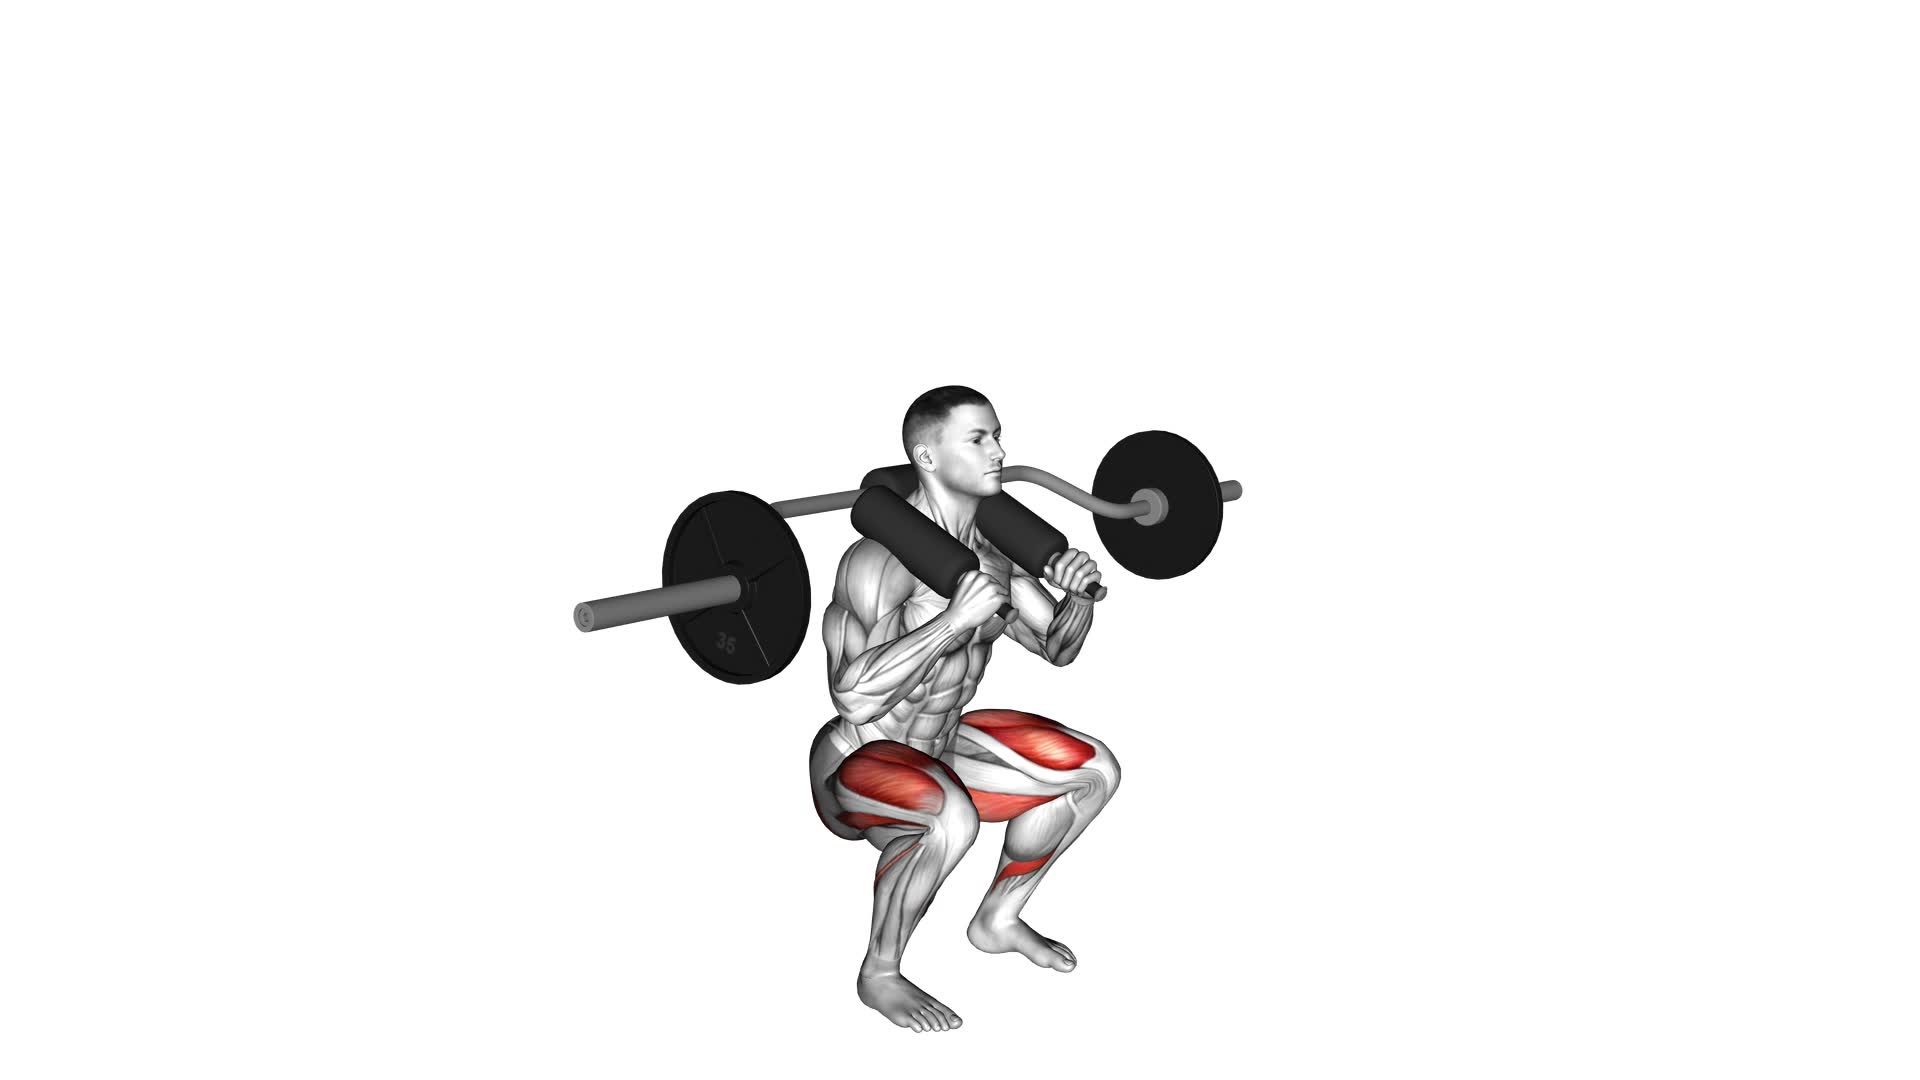 Safety Bar Front Squat - Video Exercise Guide & Tips